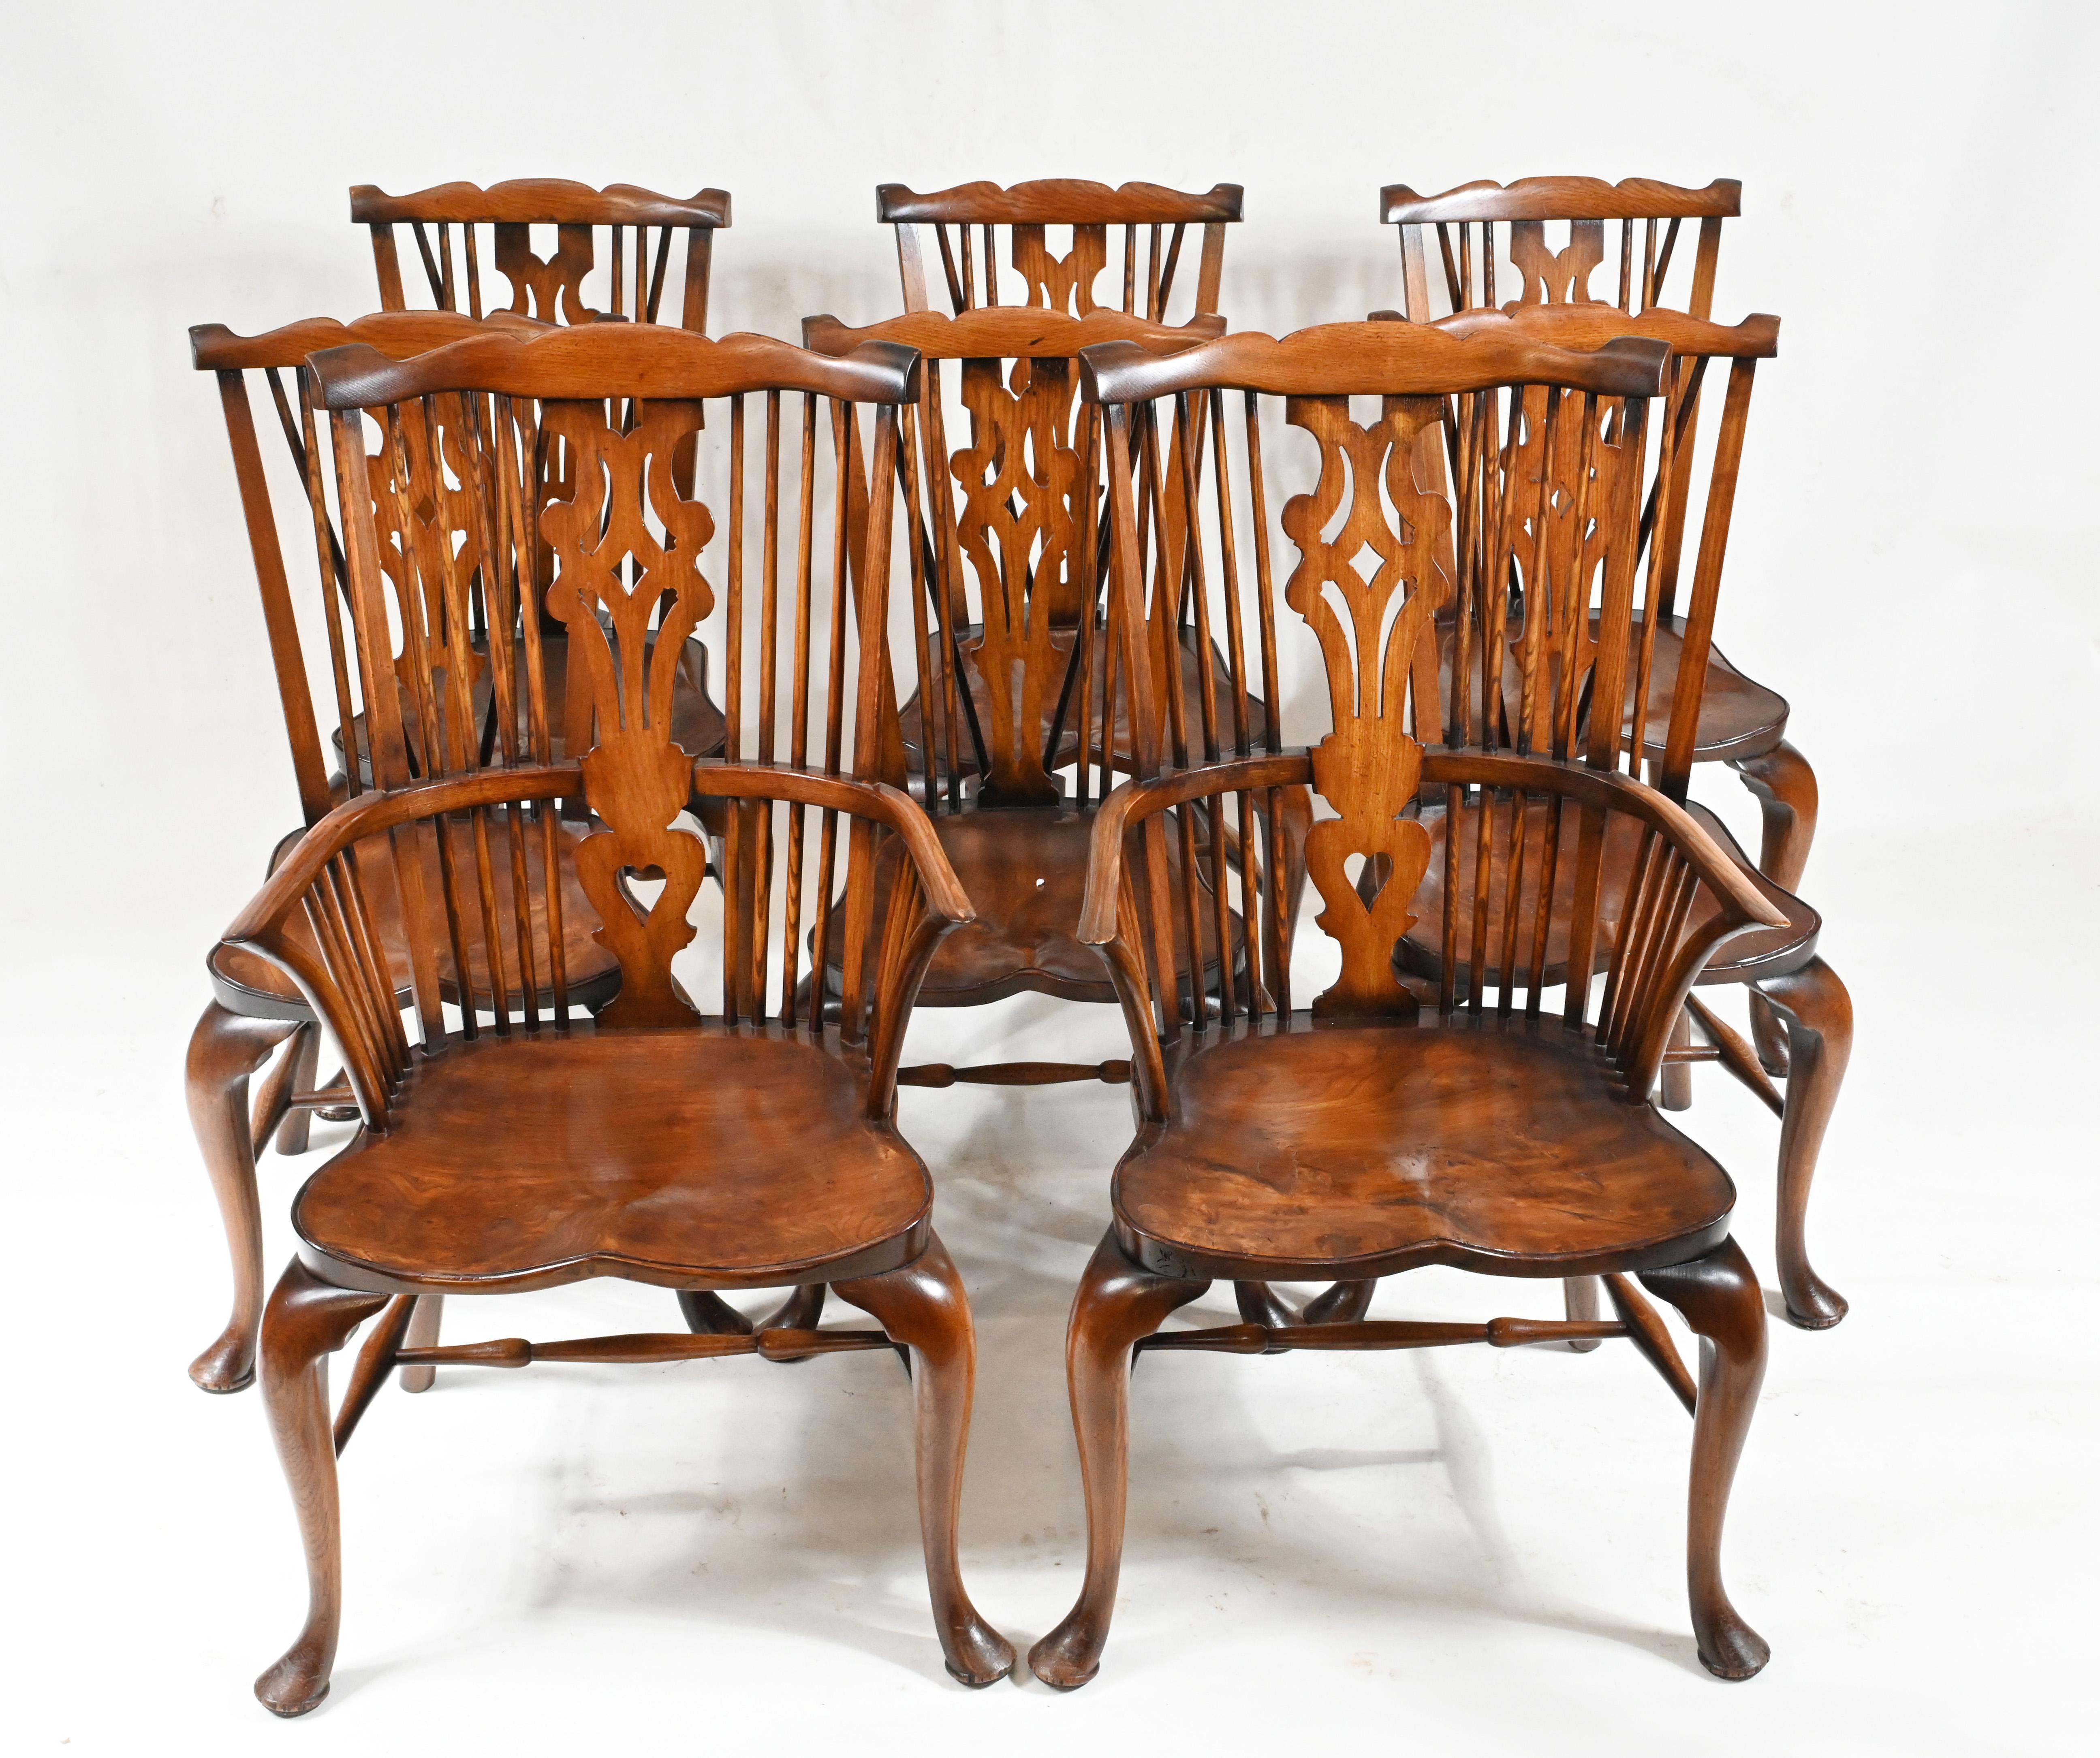 Absolutely classic set of 8 windsor dining chairs
Hand crafted from yew wood with two arm chairs and six side chairs
The quintessential farmhouse dining chairs 
Various refectory tables to match if you are looking for a complete dining set up
We